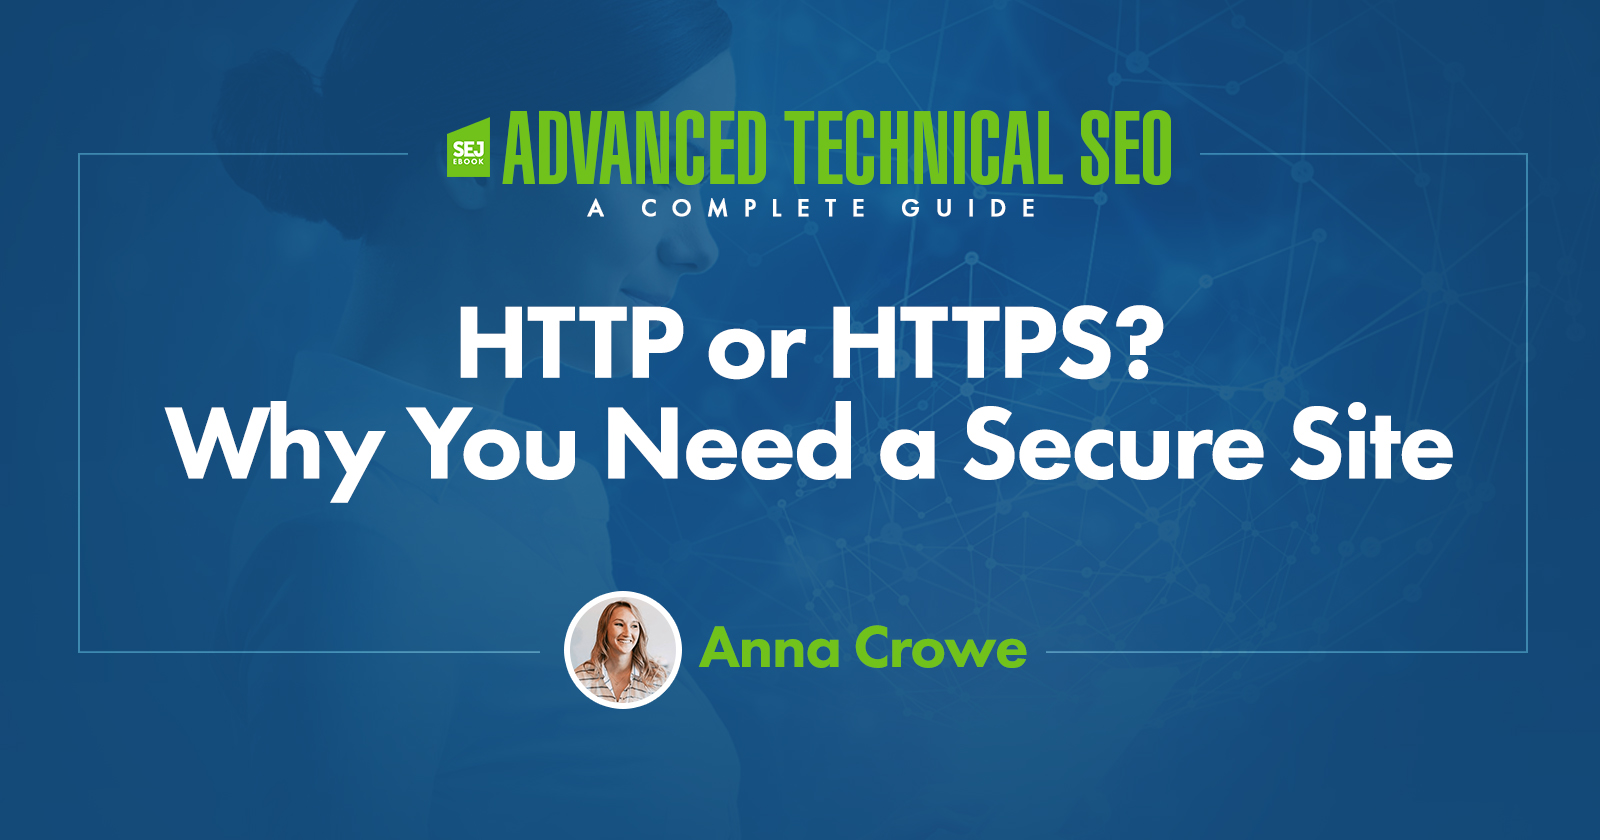 HTTP or HTTPS - Why You Need a Secure Site